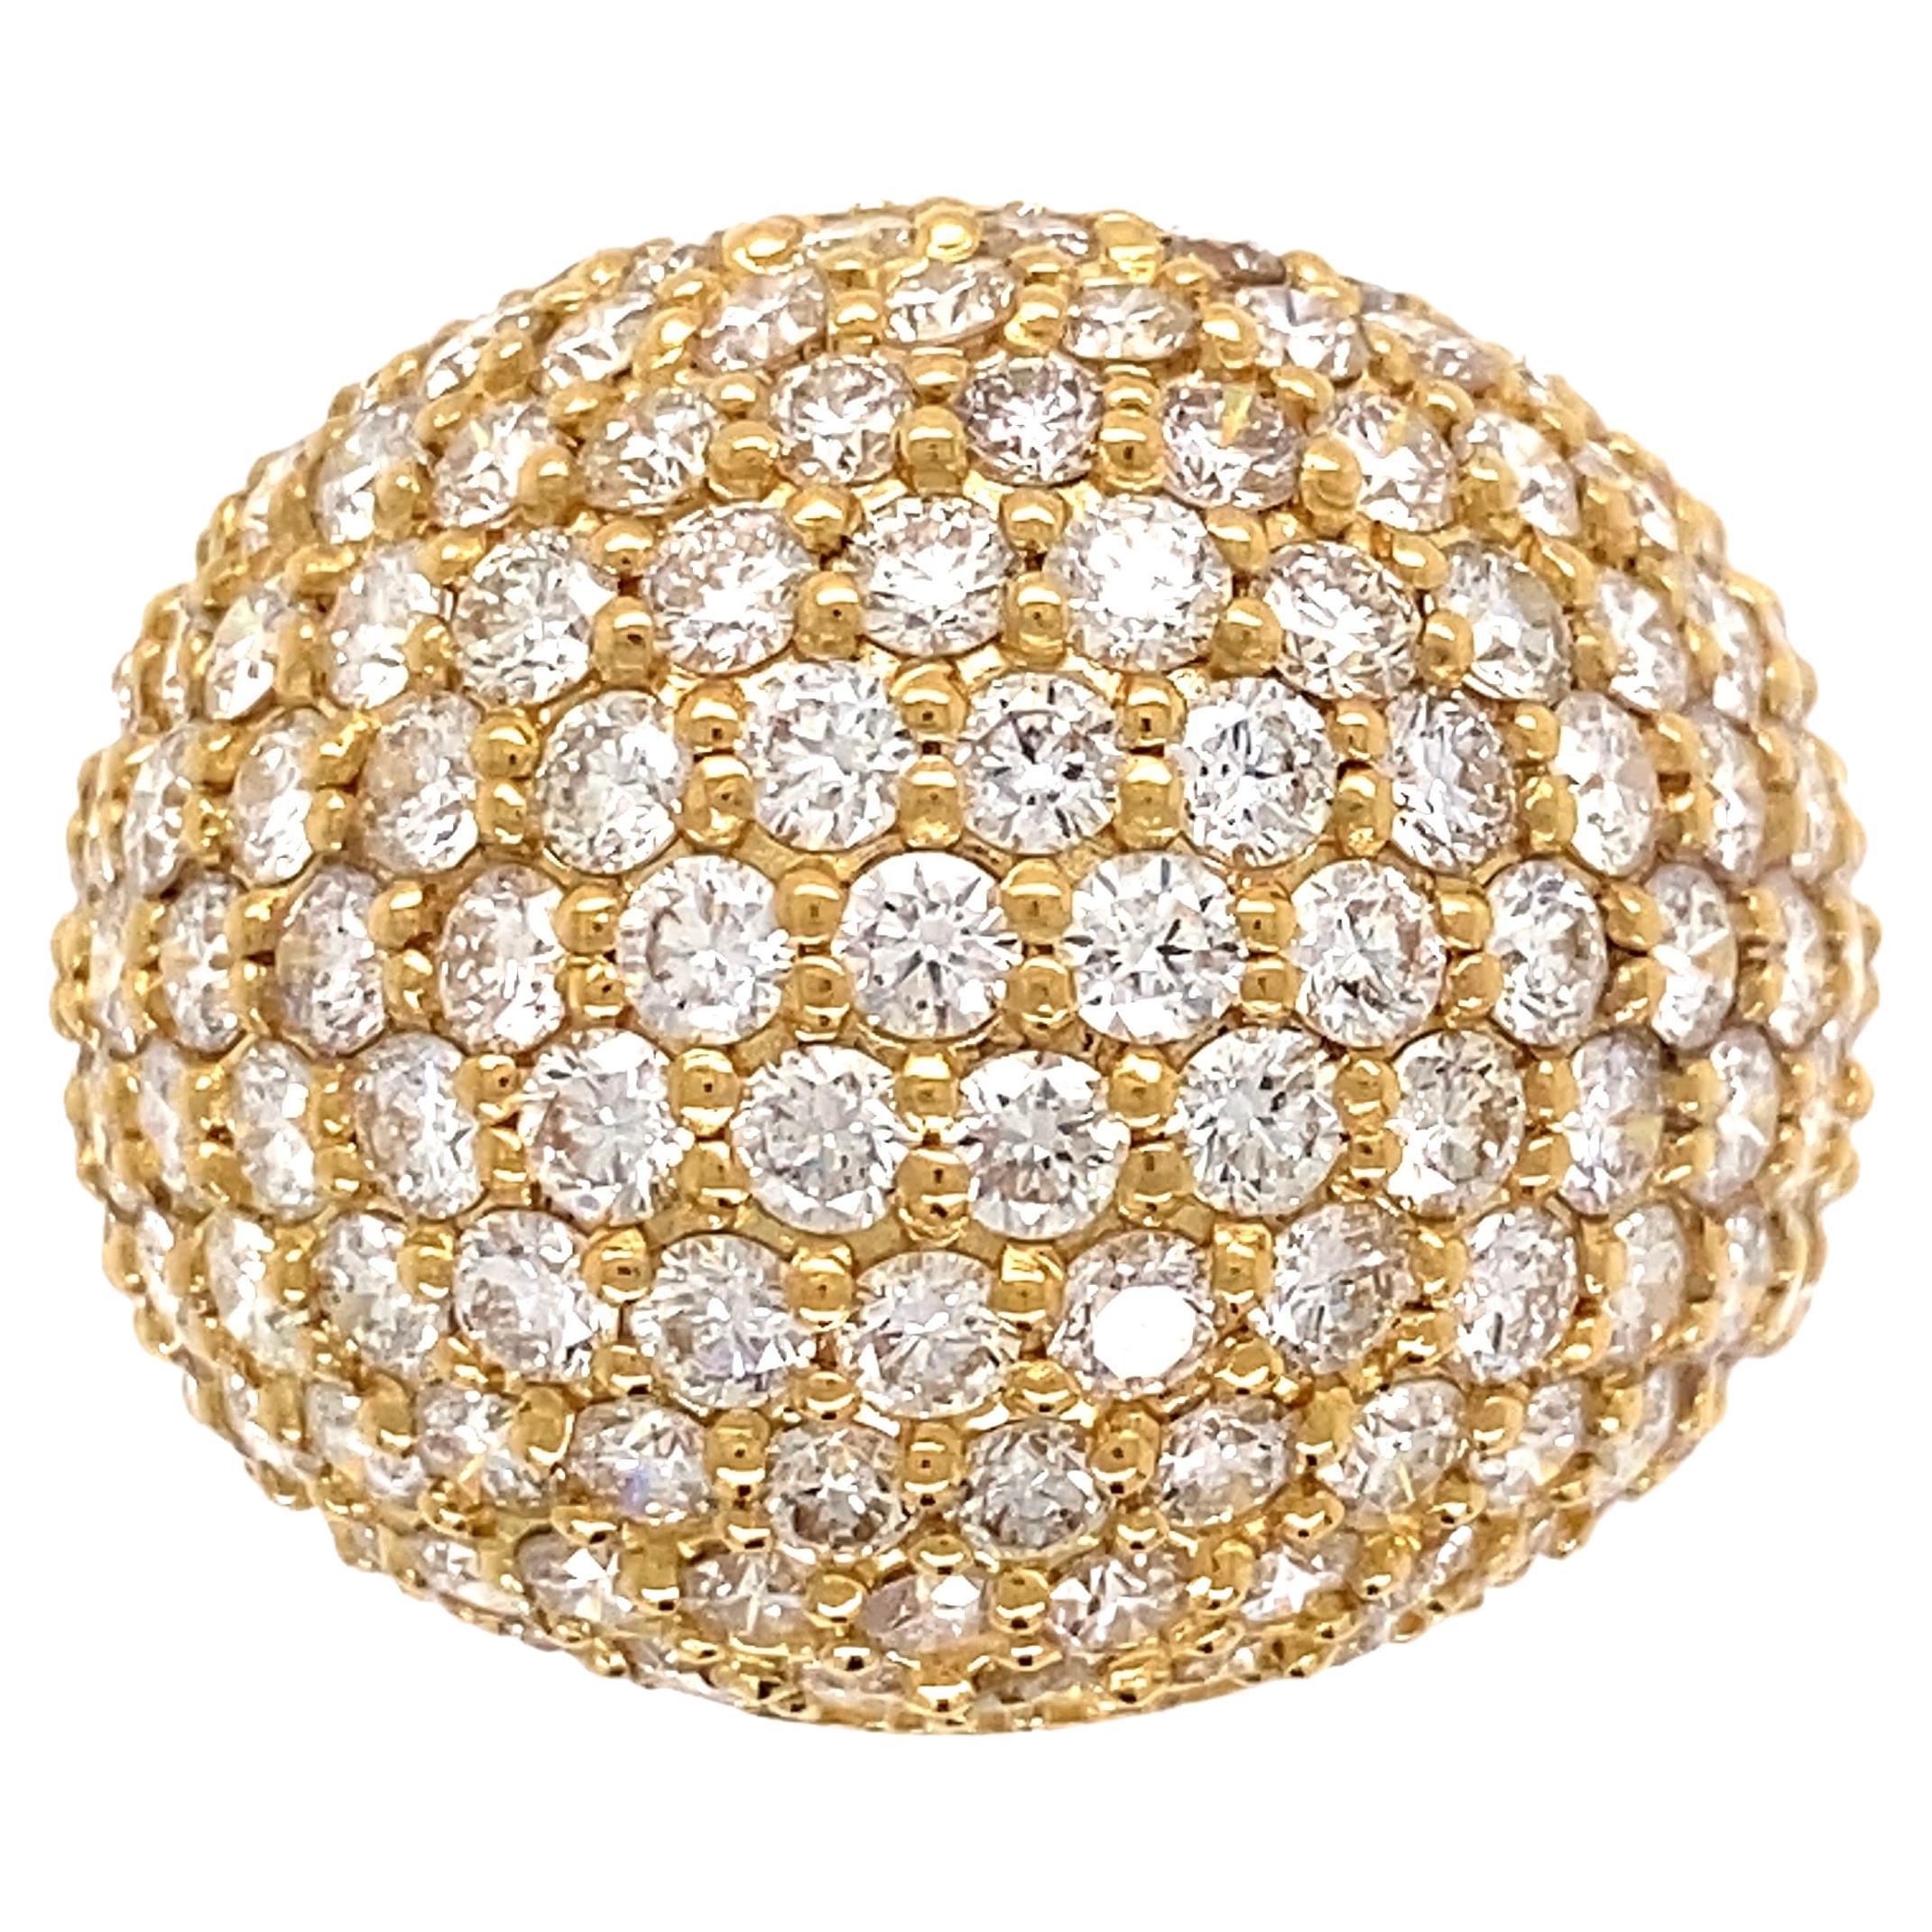 Pave Diamant-Gold-Kuppelring, Nachlass-Schmuck